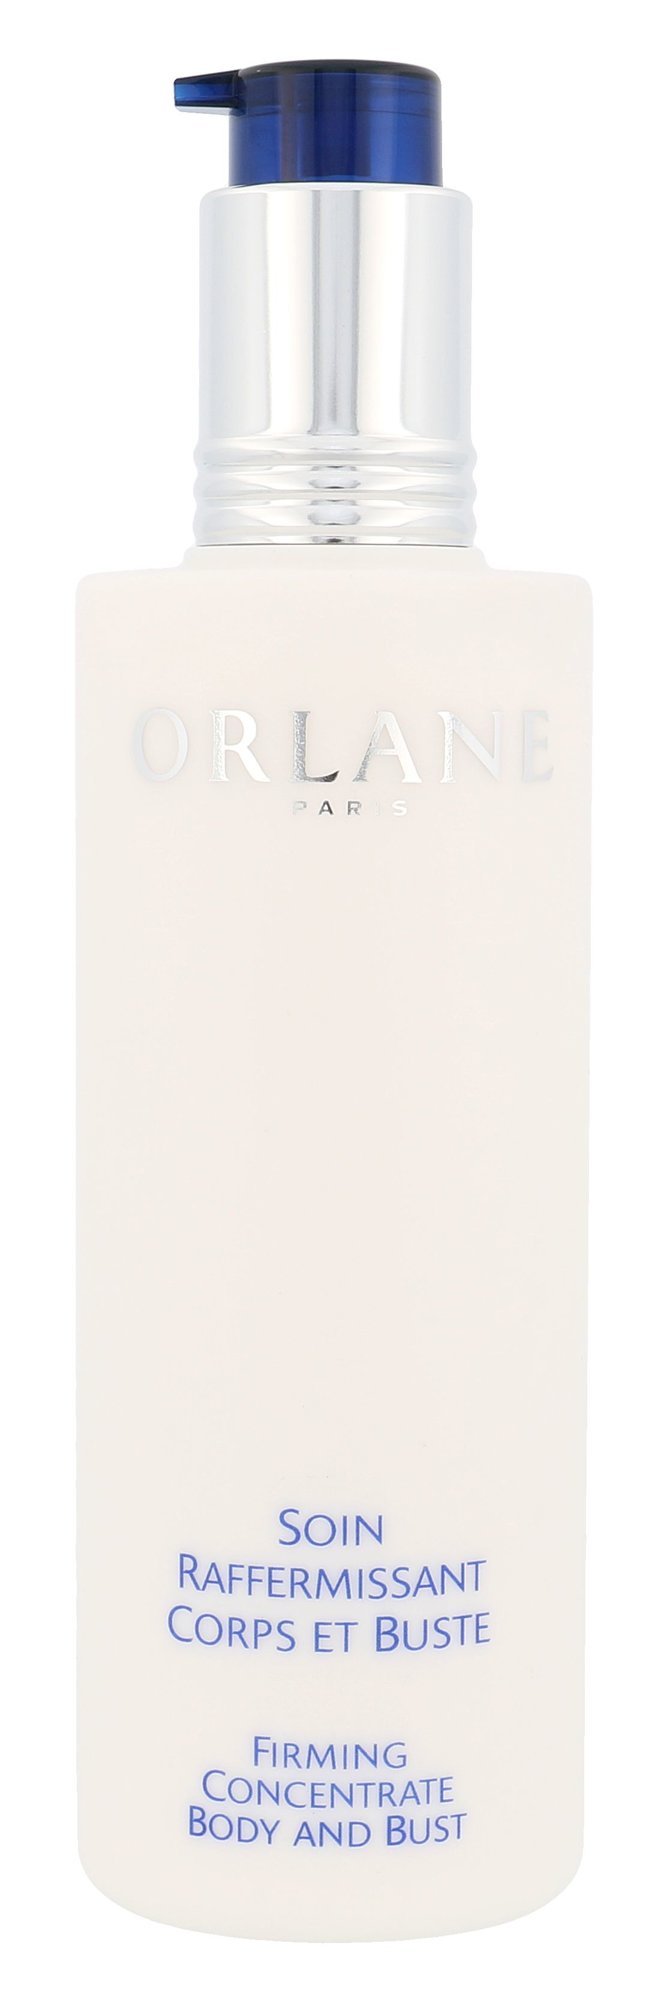 Orlane Body Firming Concentrate Body And Bust 250ml liekninamasis kremas